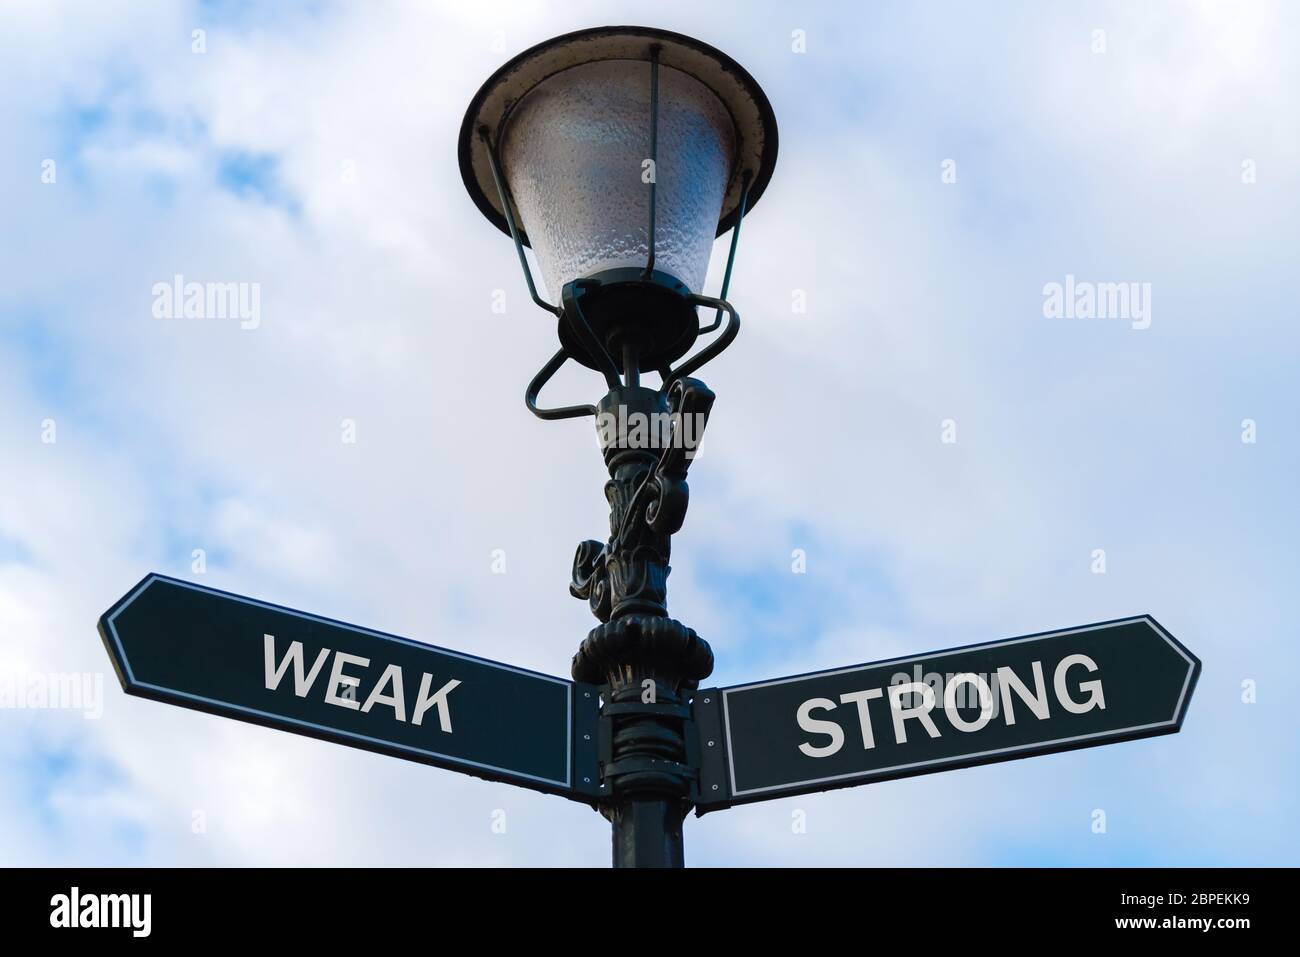 Street lighting pole with two opposite directional arrows over blue cloudy background. Weak versus Strong concept. Stock Photo